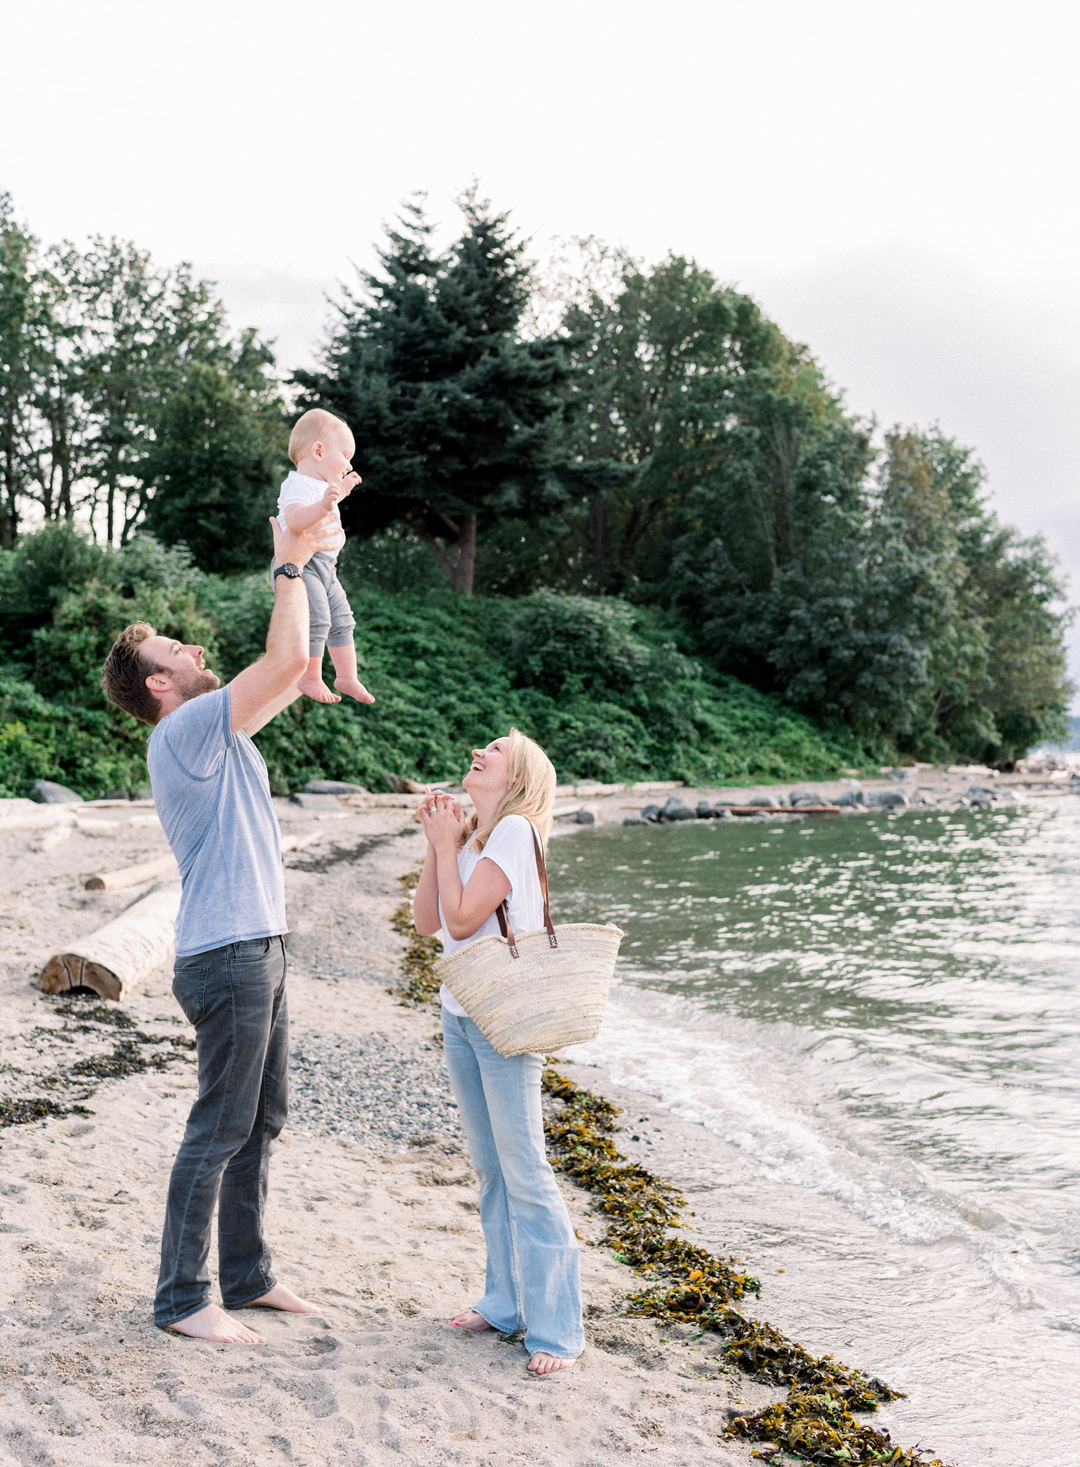 Vancouver parents playing with baby on the beach